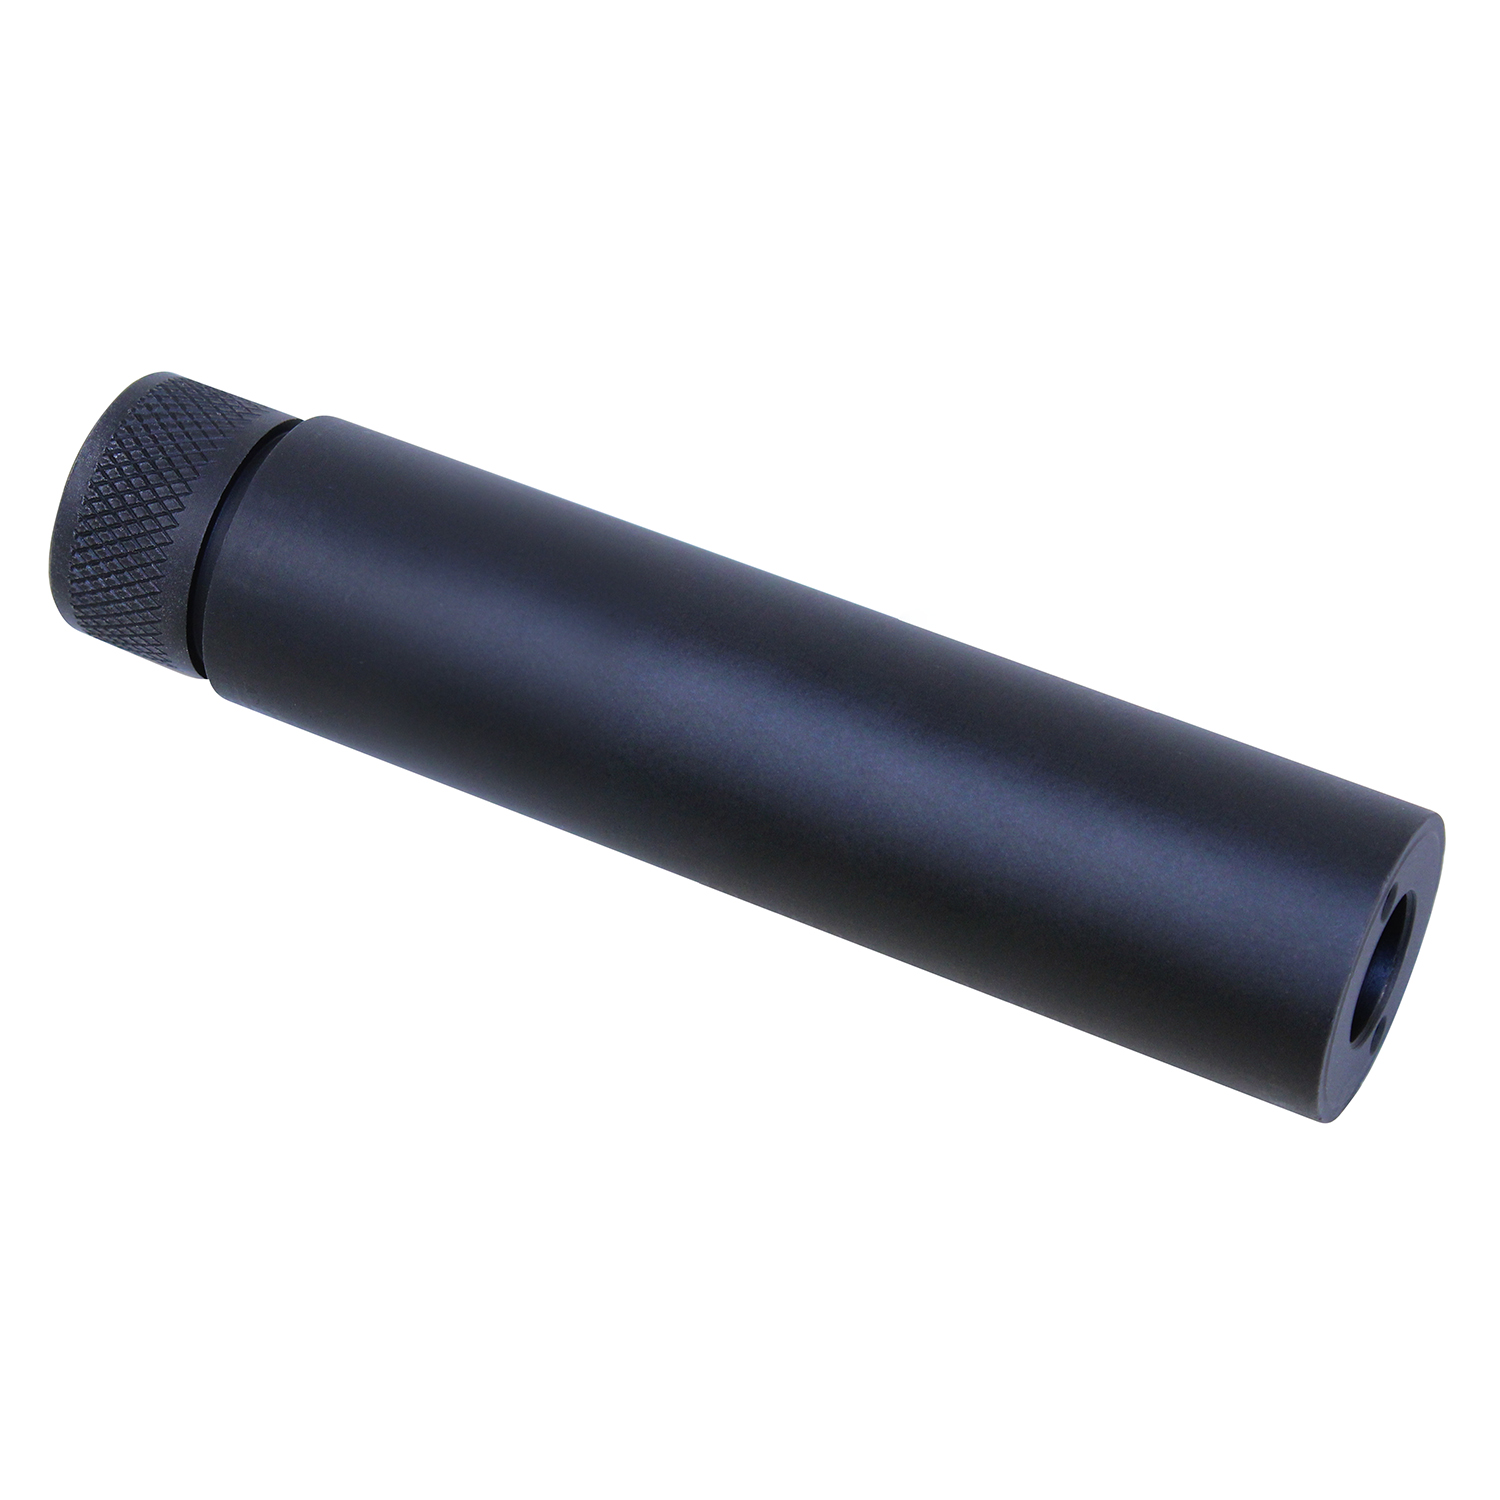 AR .308 Cal 5.5-inch fake suppressor, anodized black with no engraving